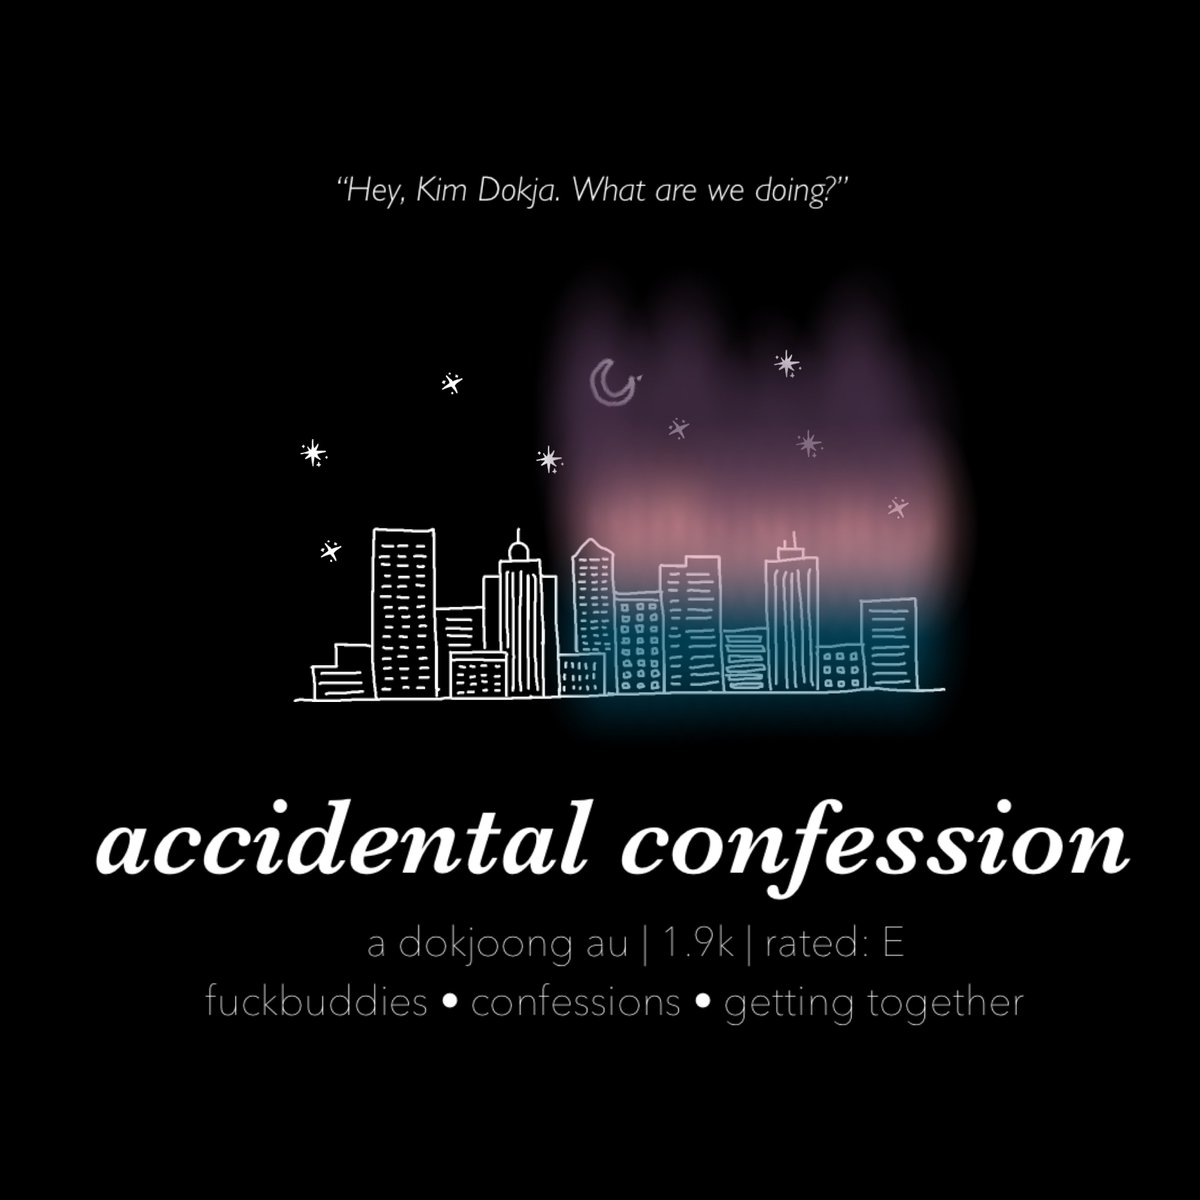 drabble hours lol

accidental confession • a #dokjoong/#dokhyuk au
- 1.9k, rated: E
- domestic fuckbuddies(?)/humor
- getting together 

‘Kim Dokja accidentally says the three doomed words in the middle of drilling Yoo Joonghyuk into the sheets.’

link: archiveofourown.org/works/55105198